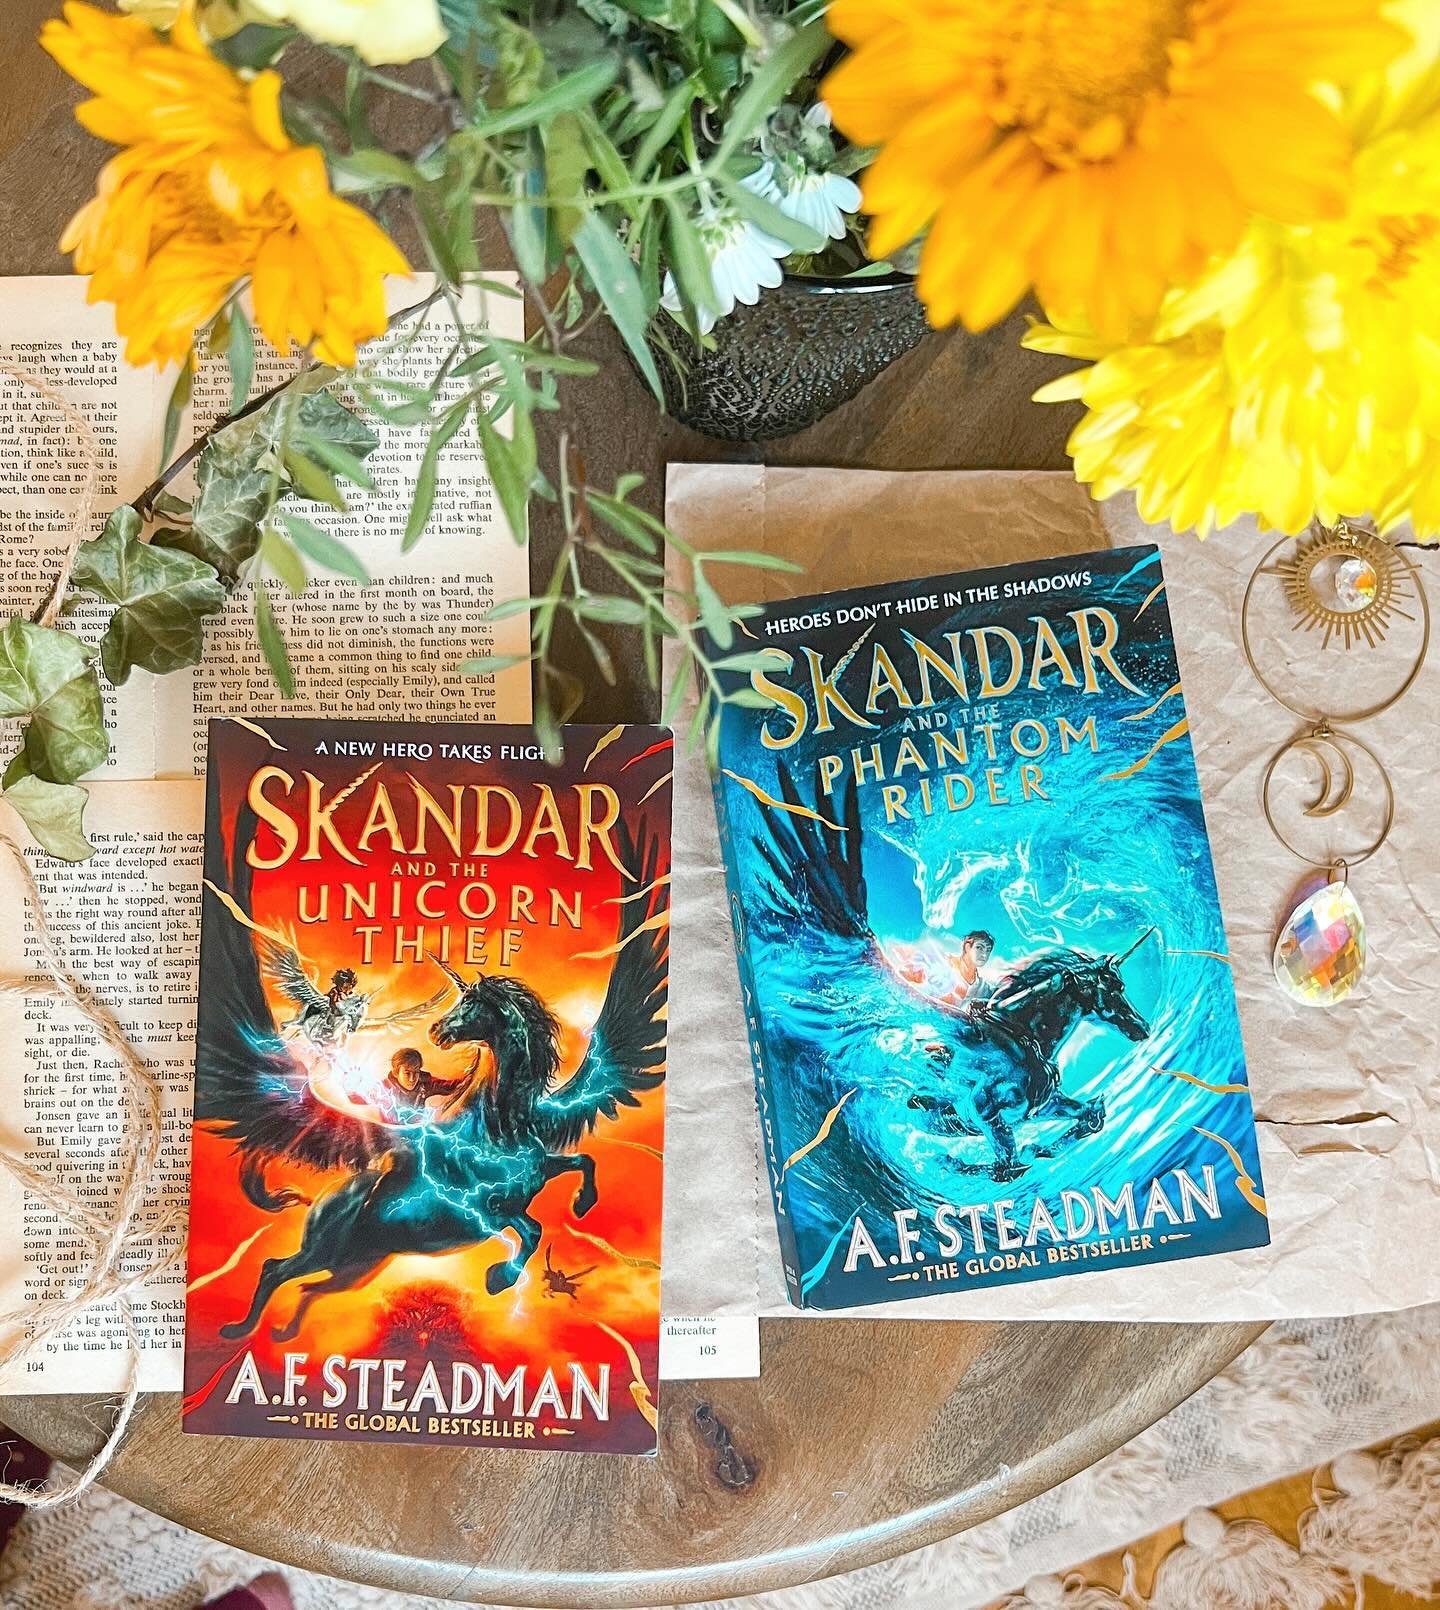 Over the last few weeks I have been completely, head over heels obsessed with the Skandar series. The books tell the story of Skandar, a 13 year old boy who&rsquo;s chosen to become a unicorn rider, so he heads off to the Eyrie, a magical school wher